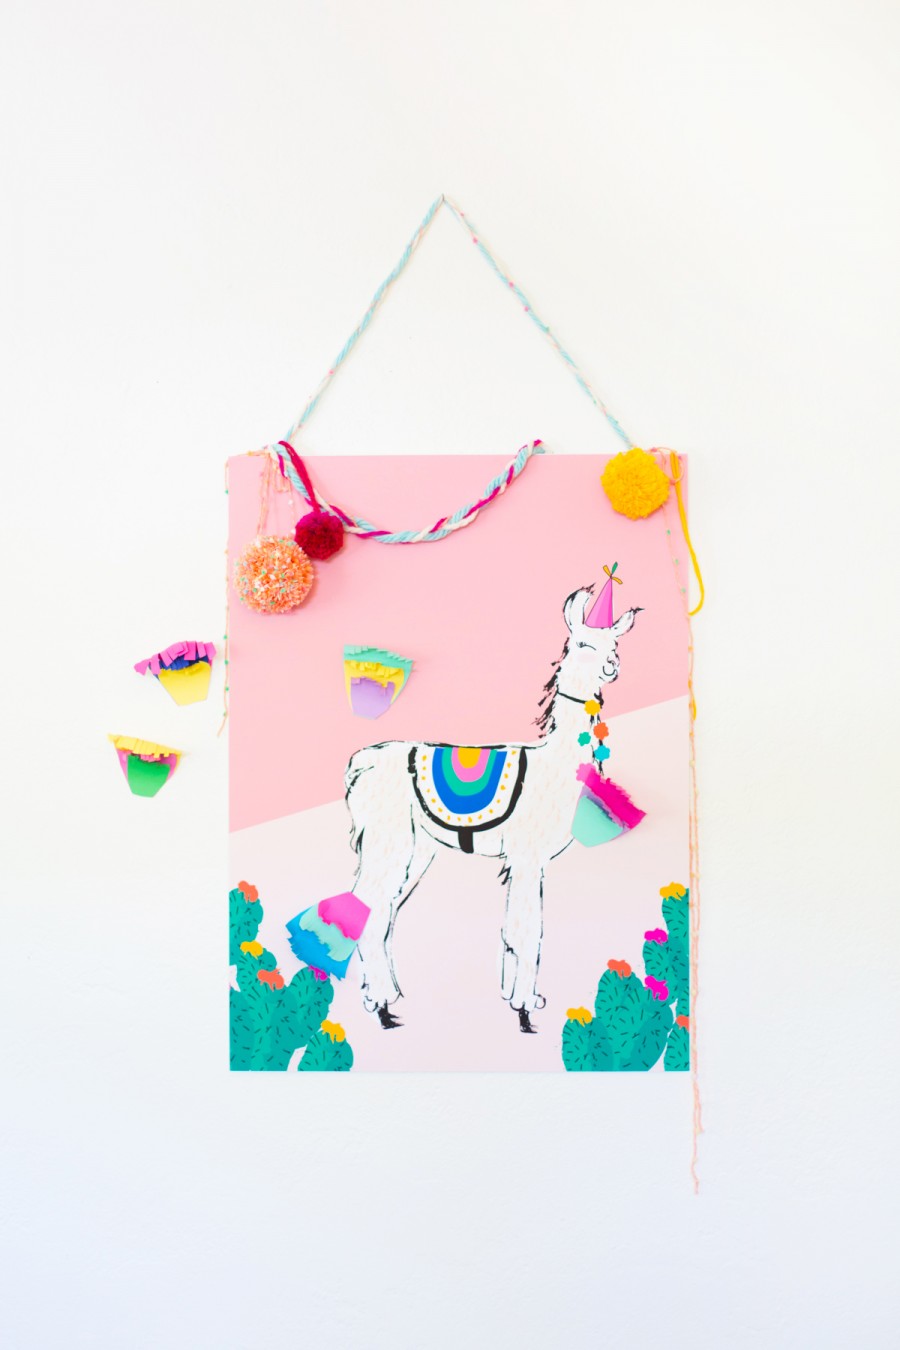 pin-the-tail-on-the-llama-game-4-450x6752x